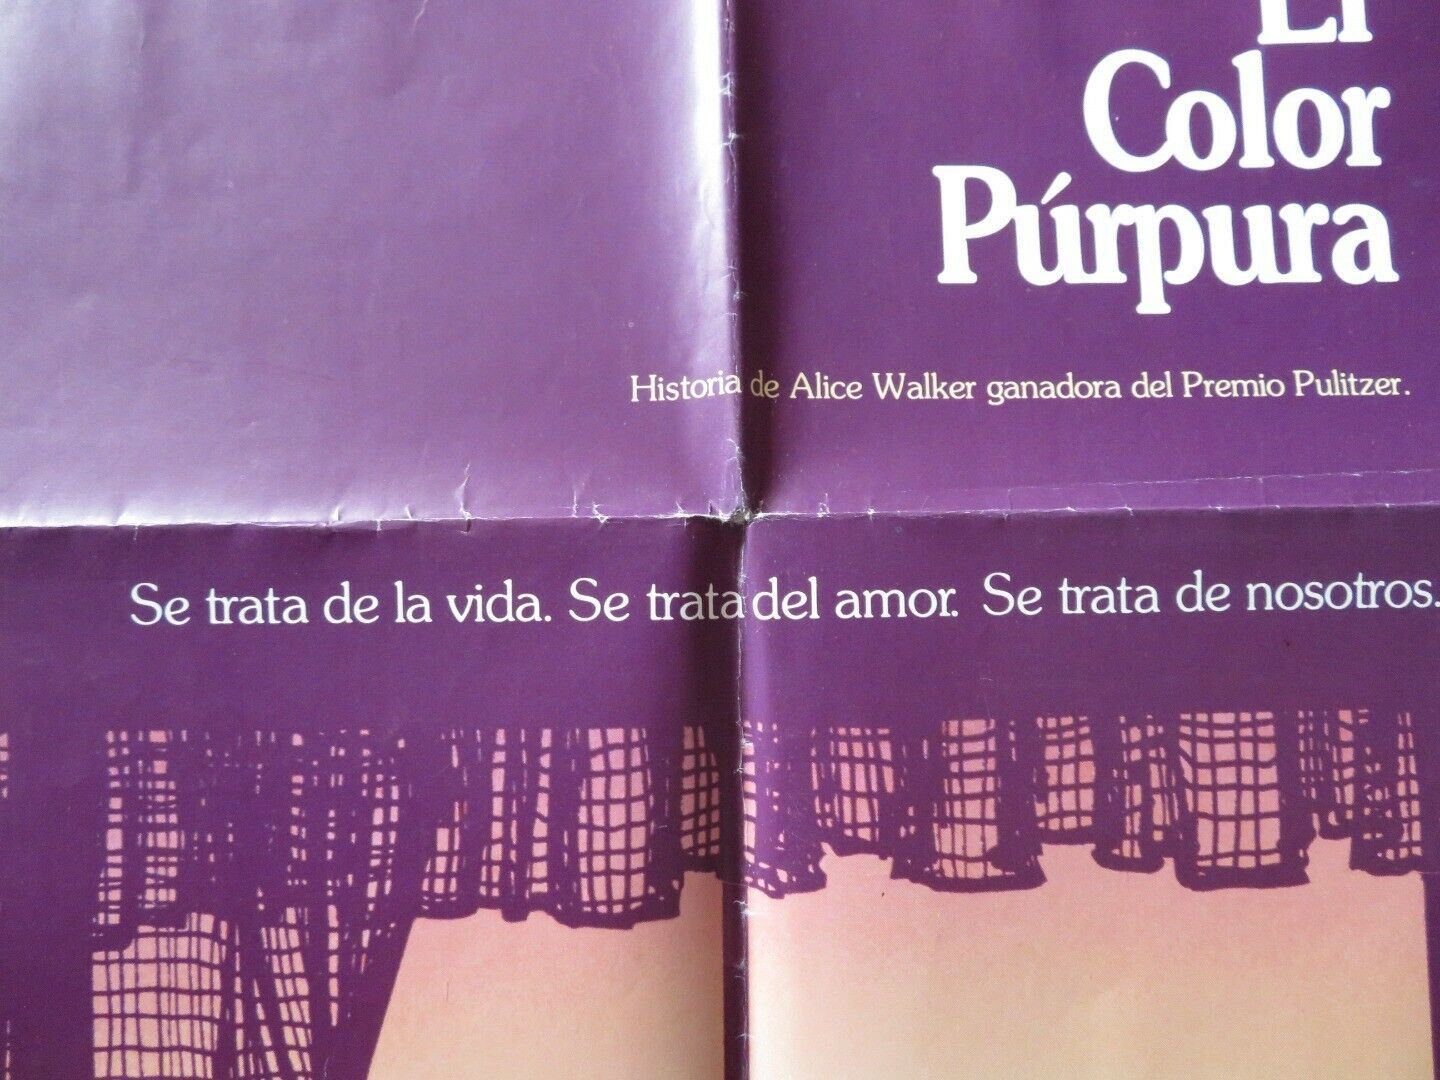 THE COLOR PURPLE SPANISH ONE SHEET FOLDED POSTER SPIELBERG DANNY GLOVER 1985